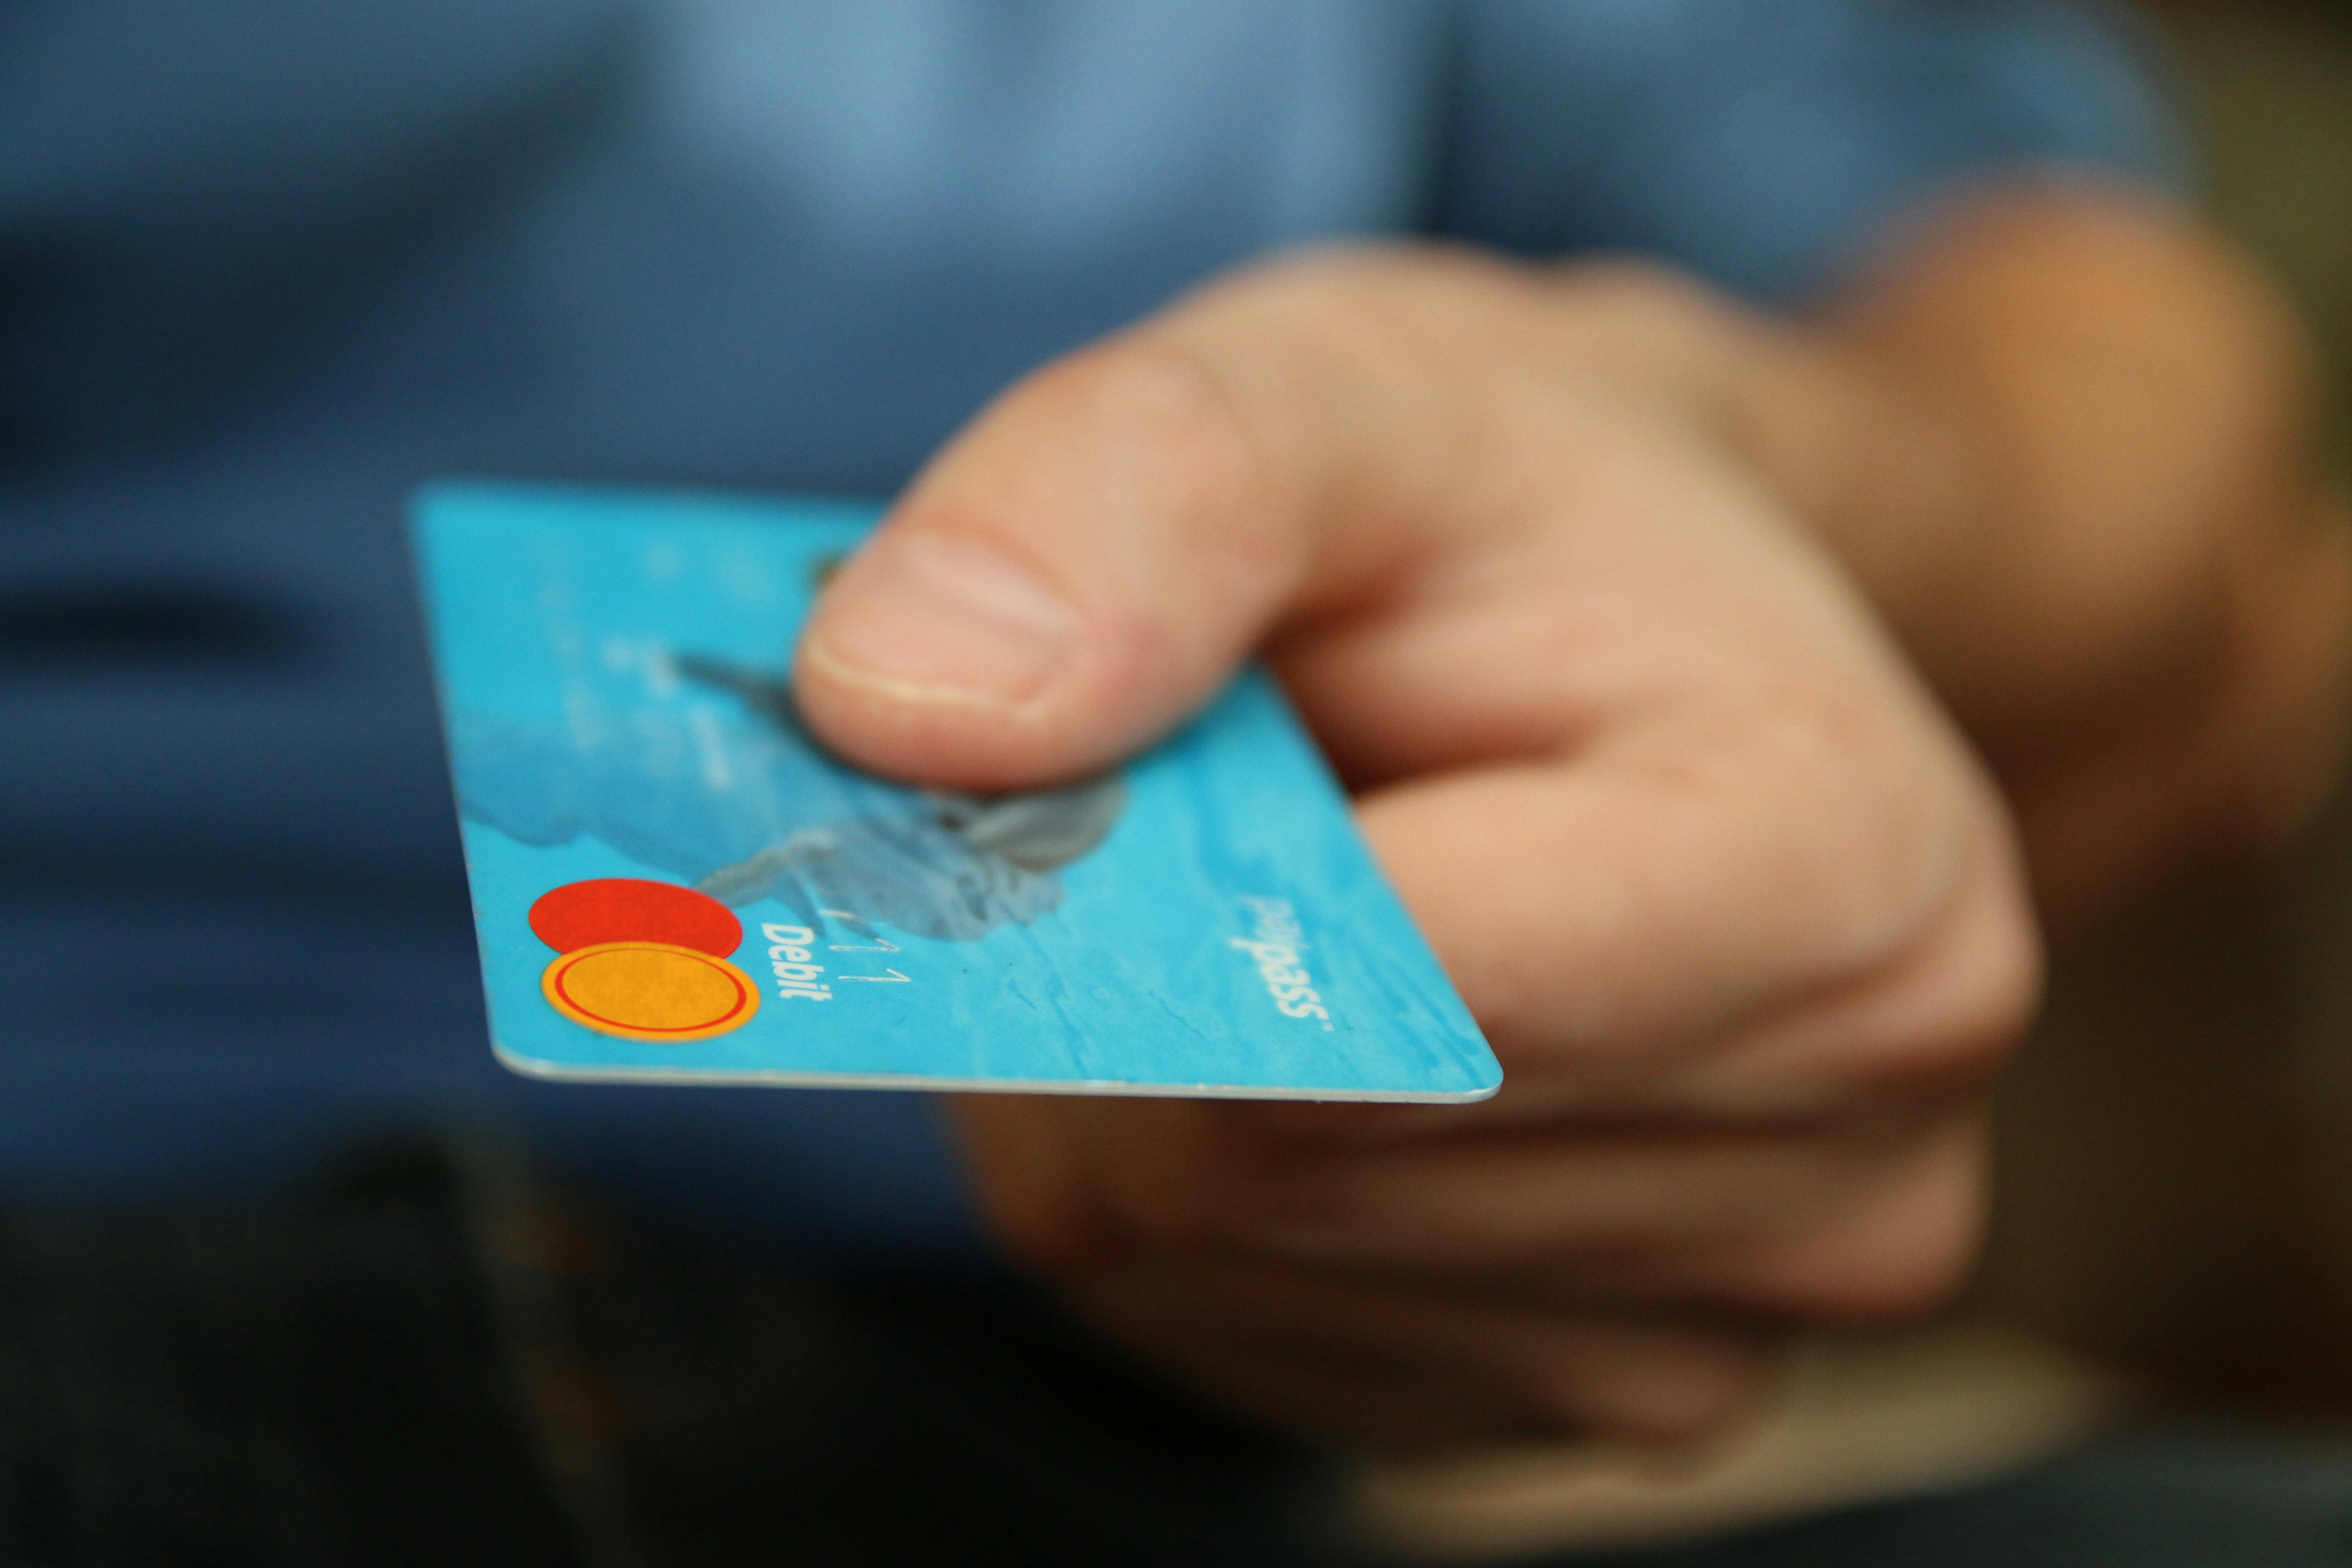 Best Credit Cards for Financial Goals